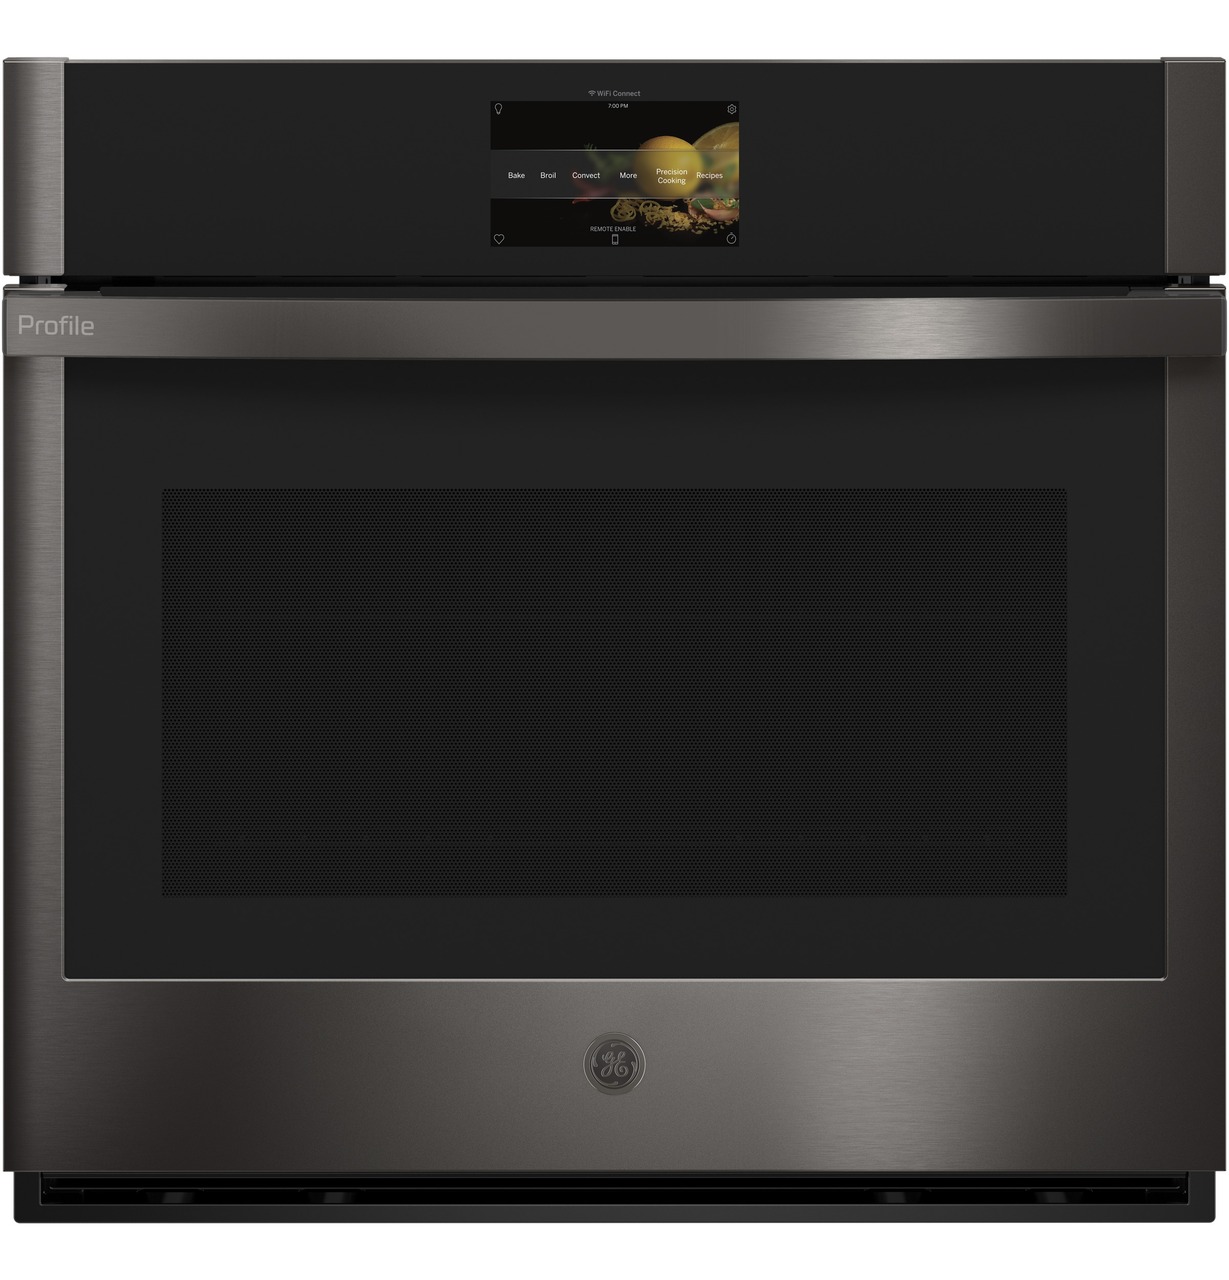 GE smart built-in convection single wall oven with in-oven camera